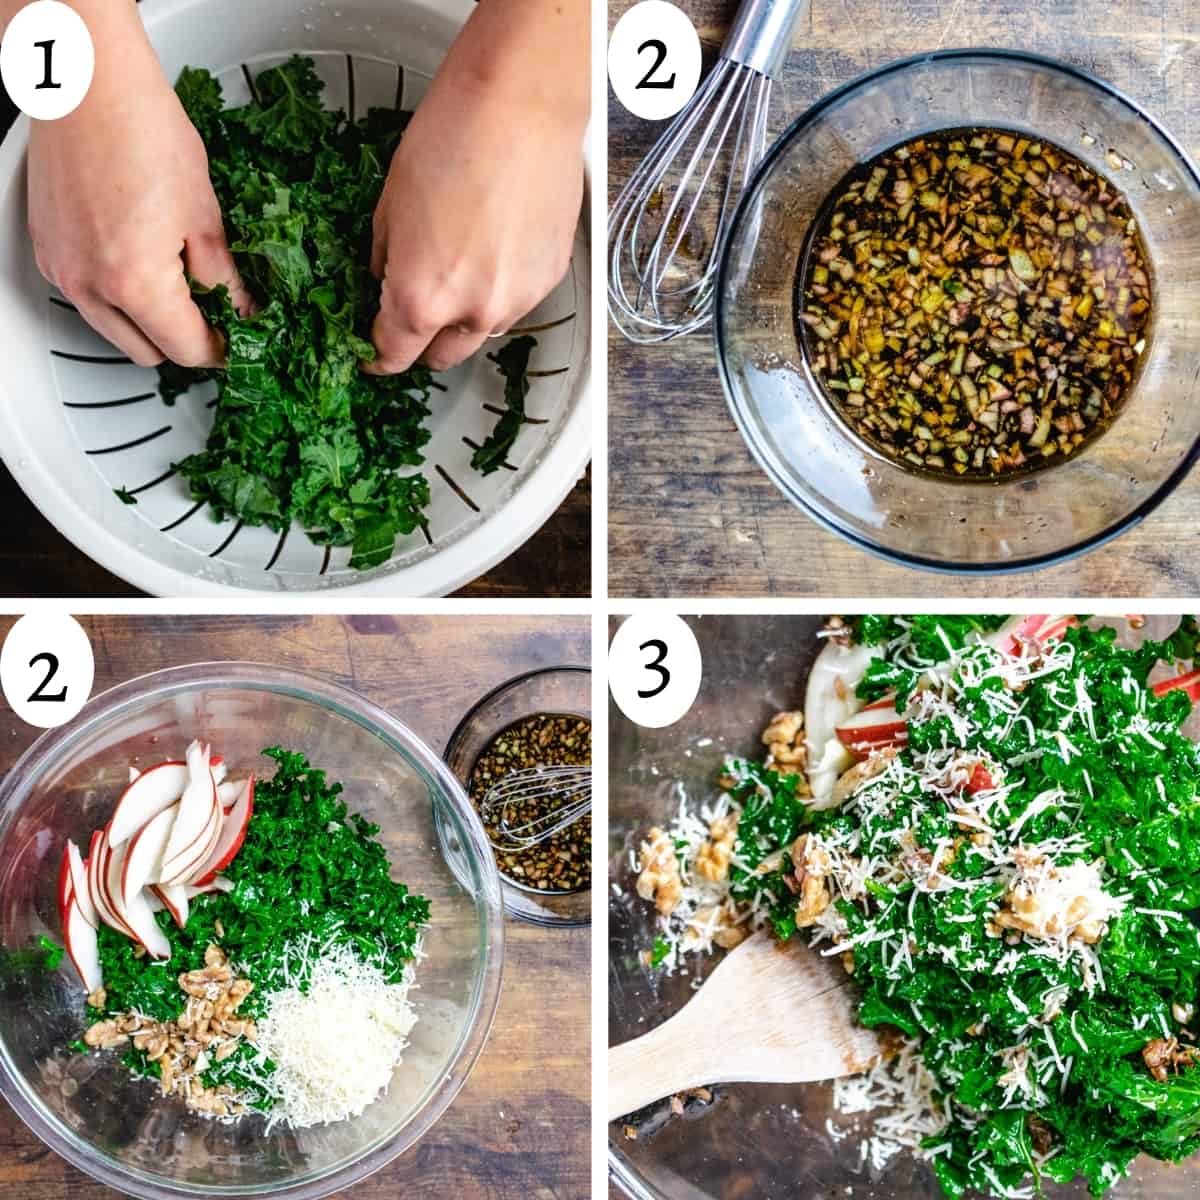 Four images in a collage showing steps to making the salad recipe.